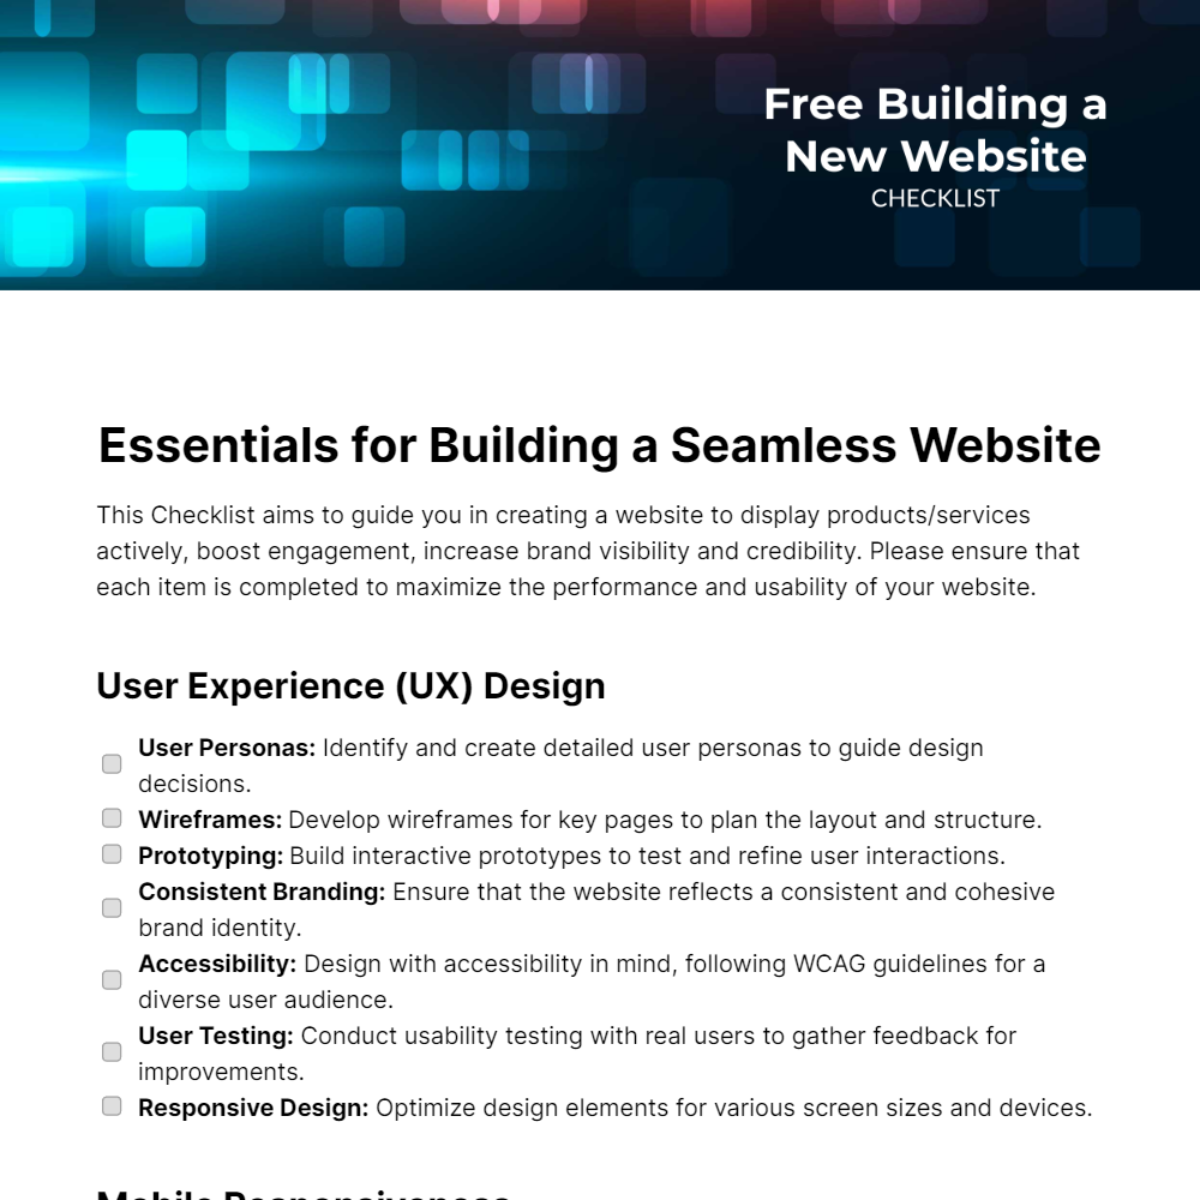 Free Building a New Website Checklist Template